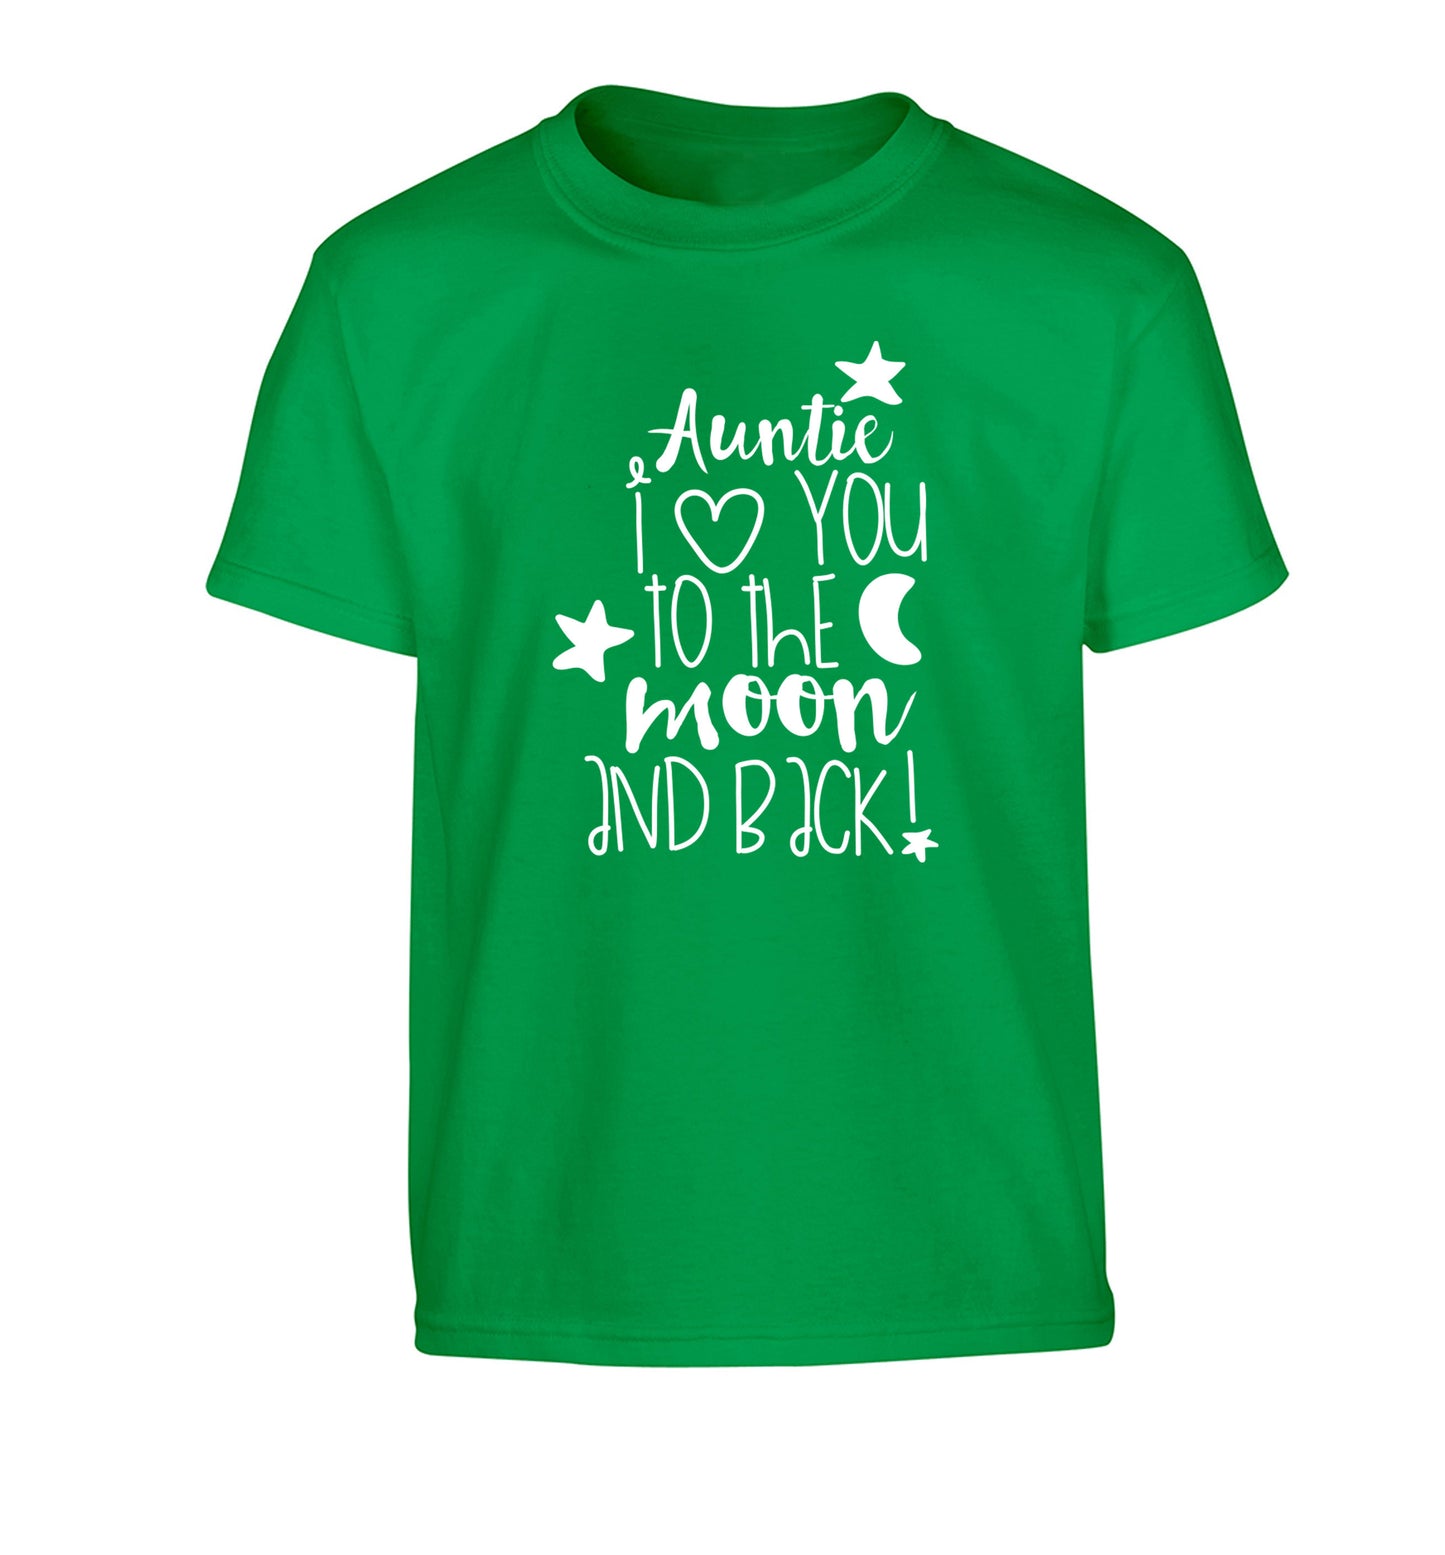 Auntie I love you to the moon and back Children's green Tshirt 12-14 Years